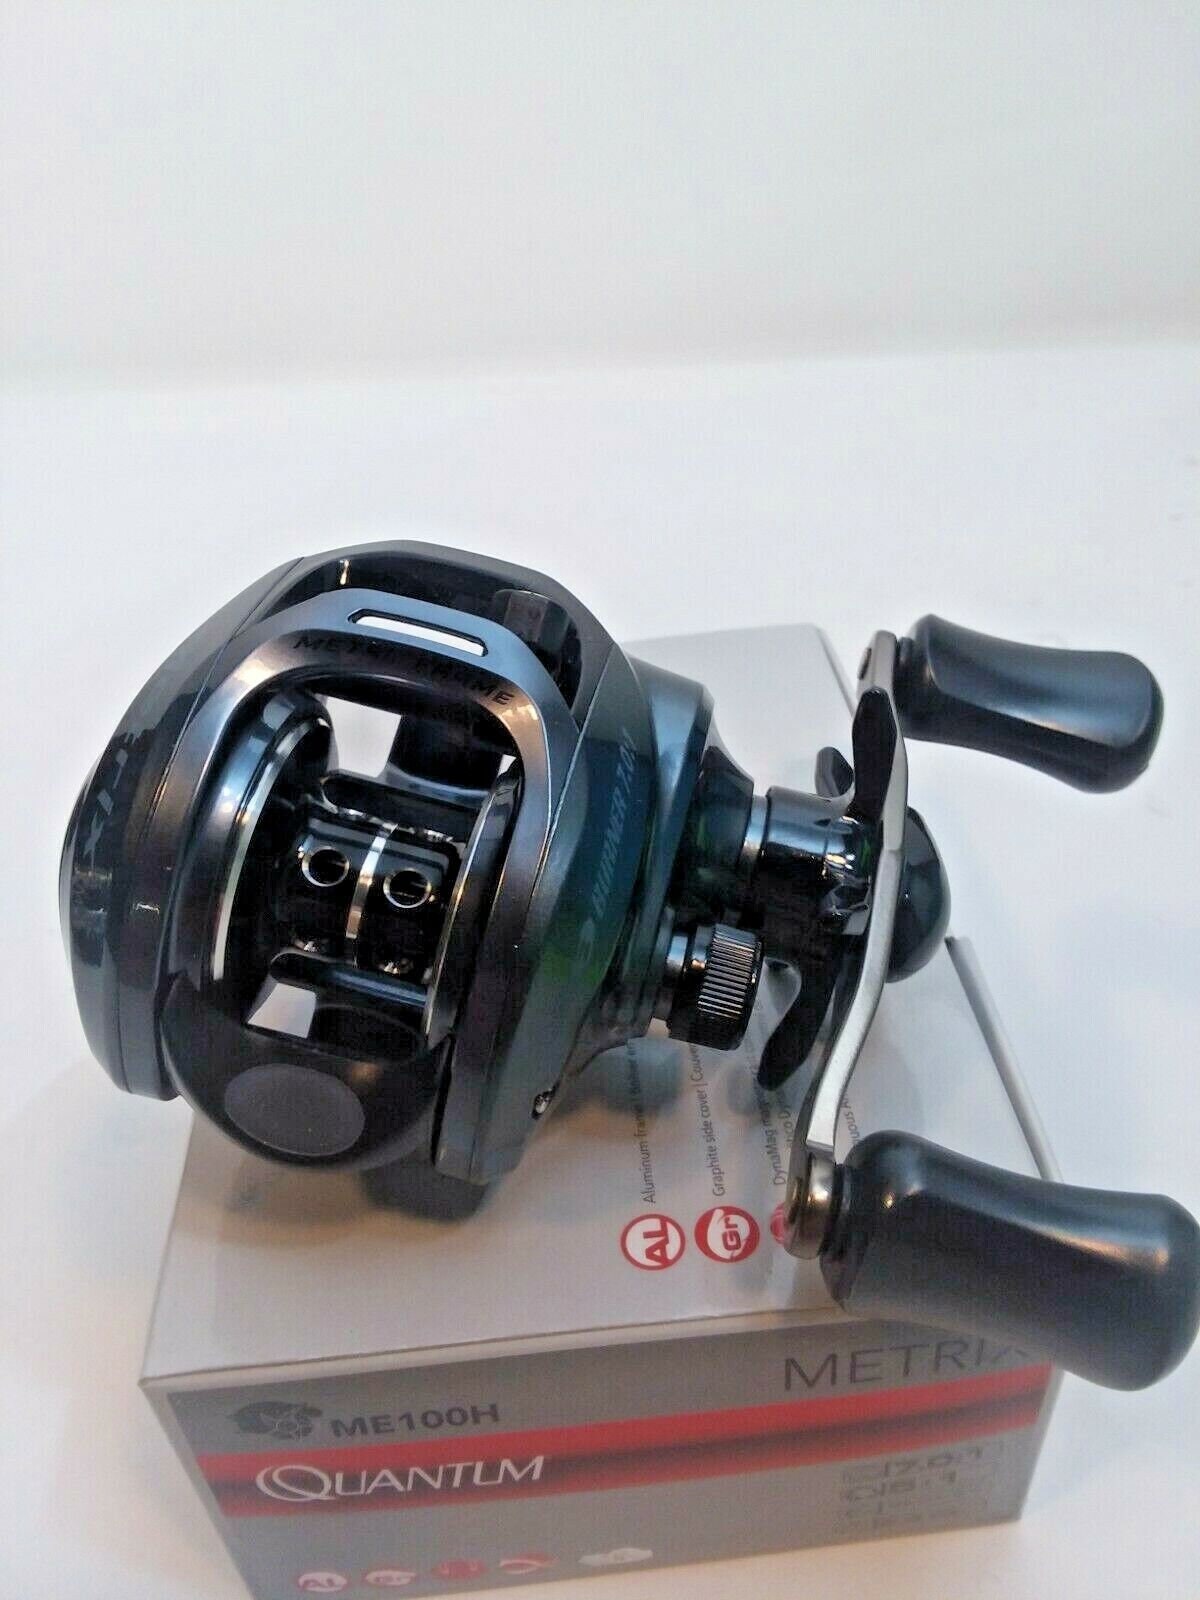 Shakespeare Alpha Low profile bait caster fishing reel how to take apart  and service 